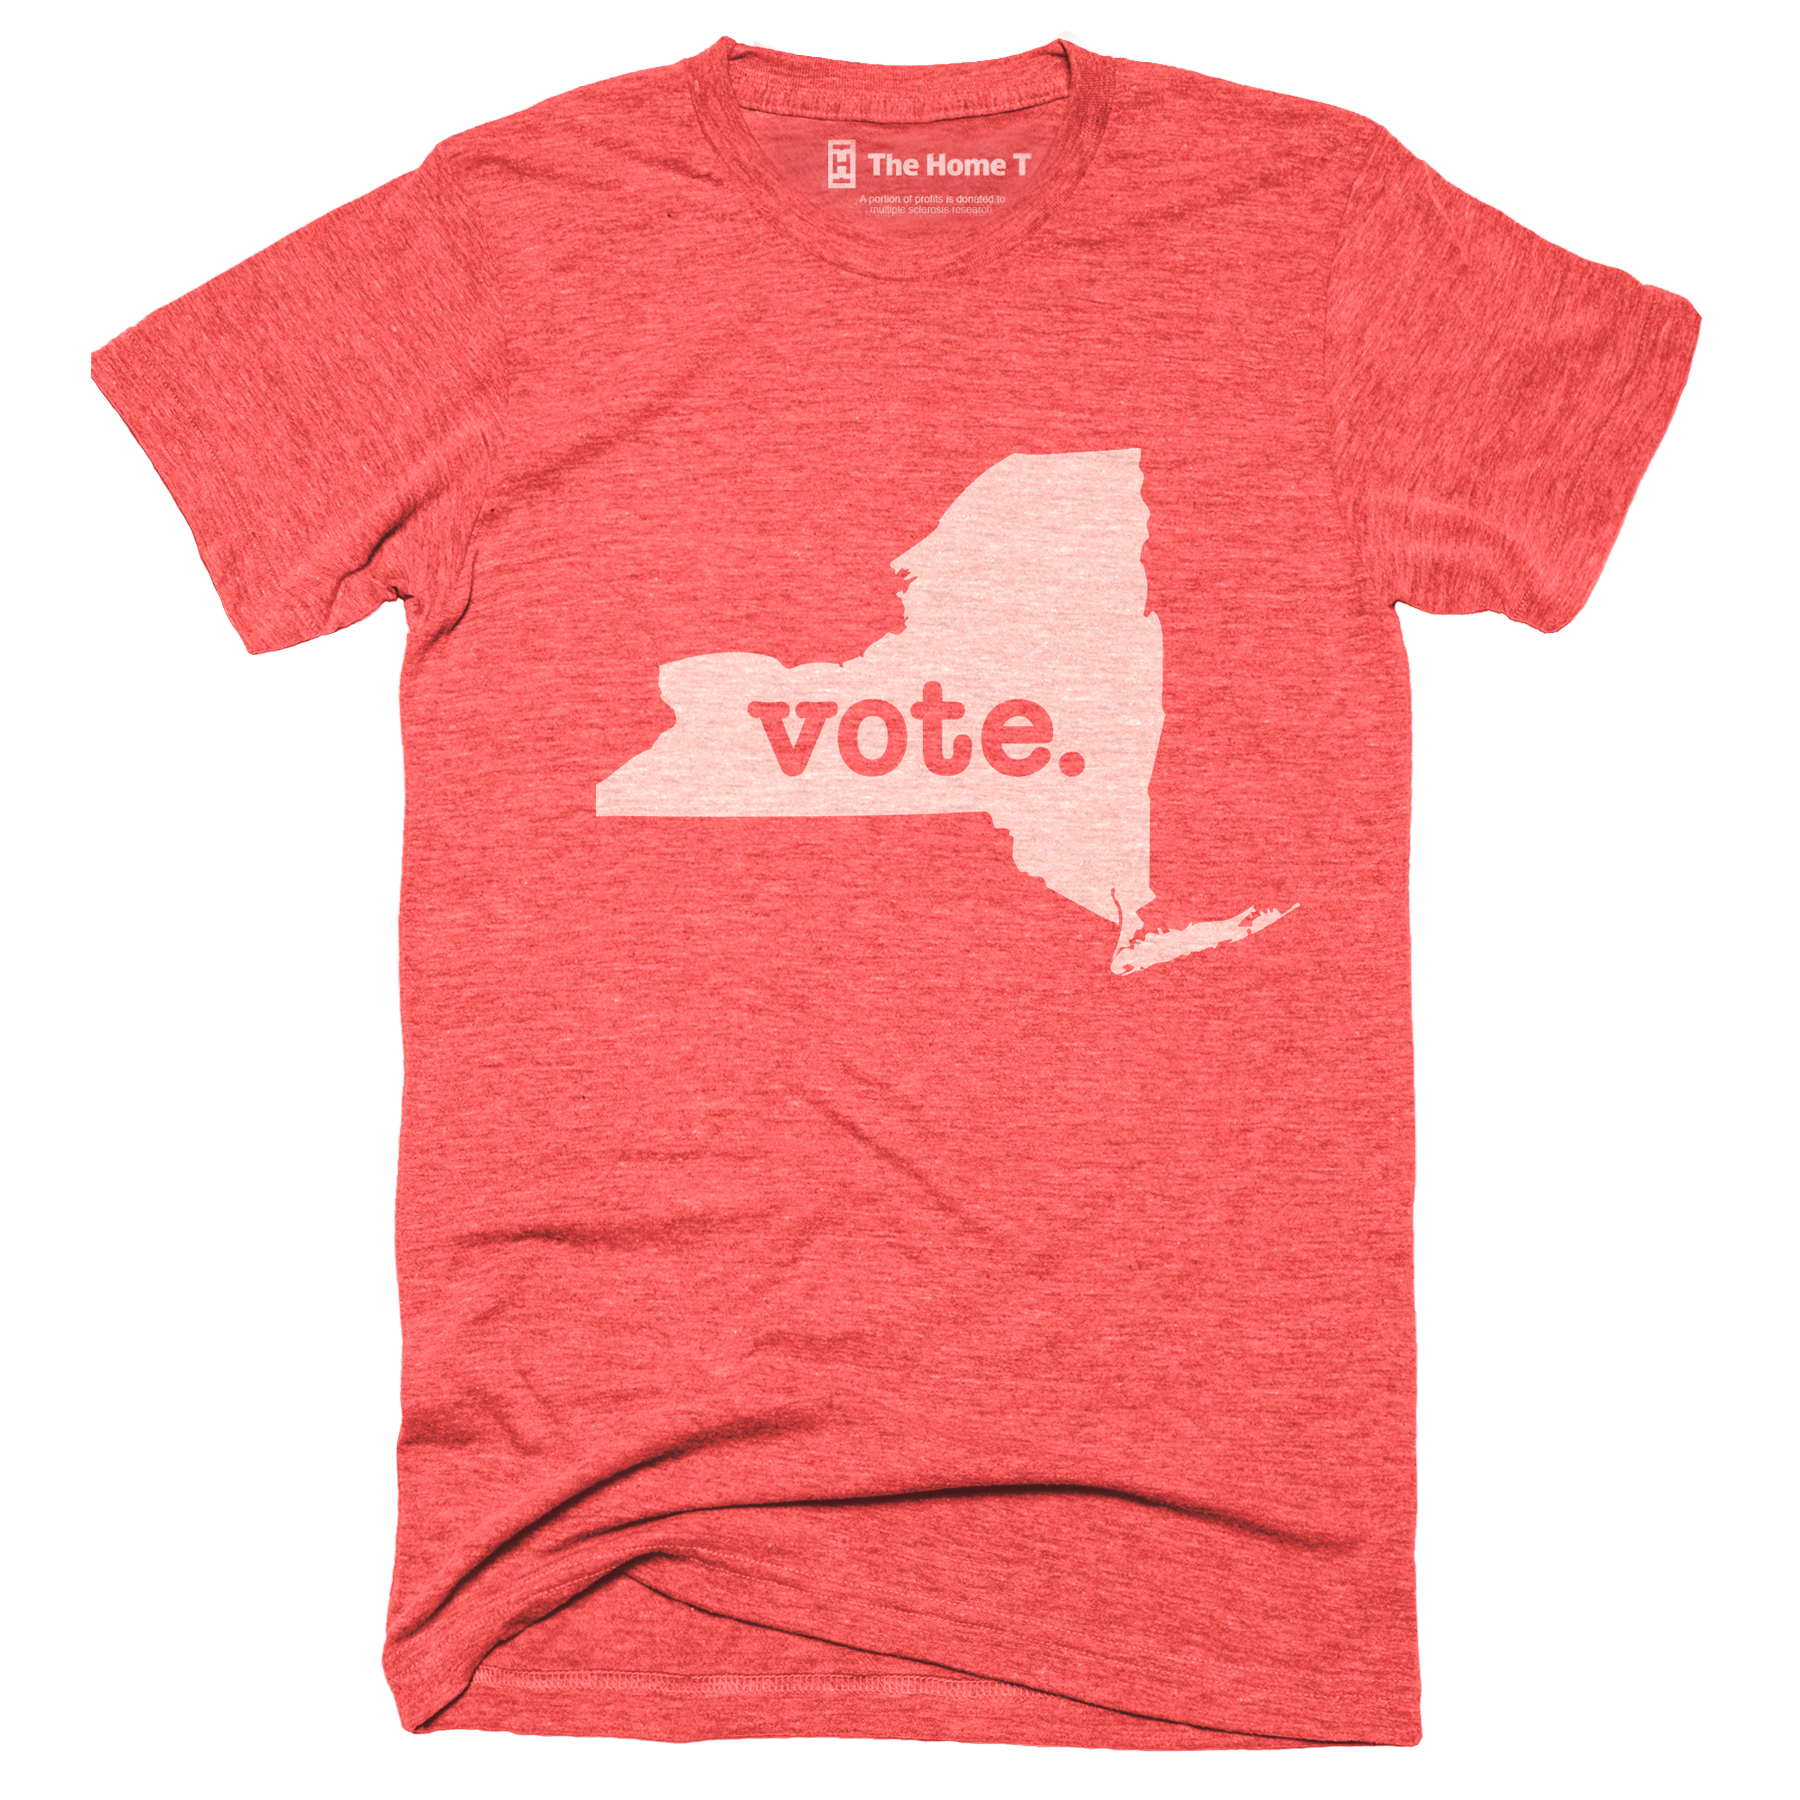 New York Vote Home T Vote The Home T XS Red